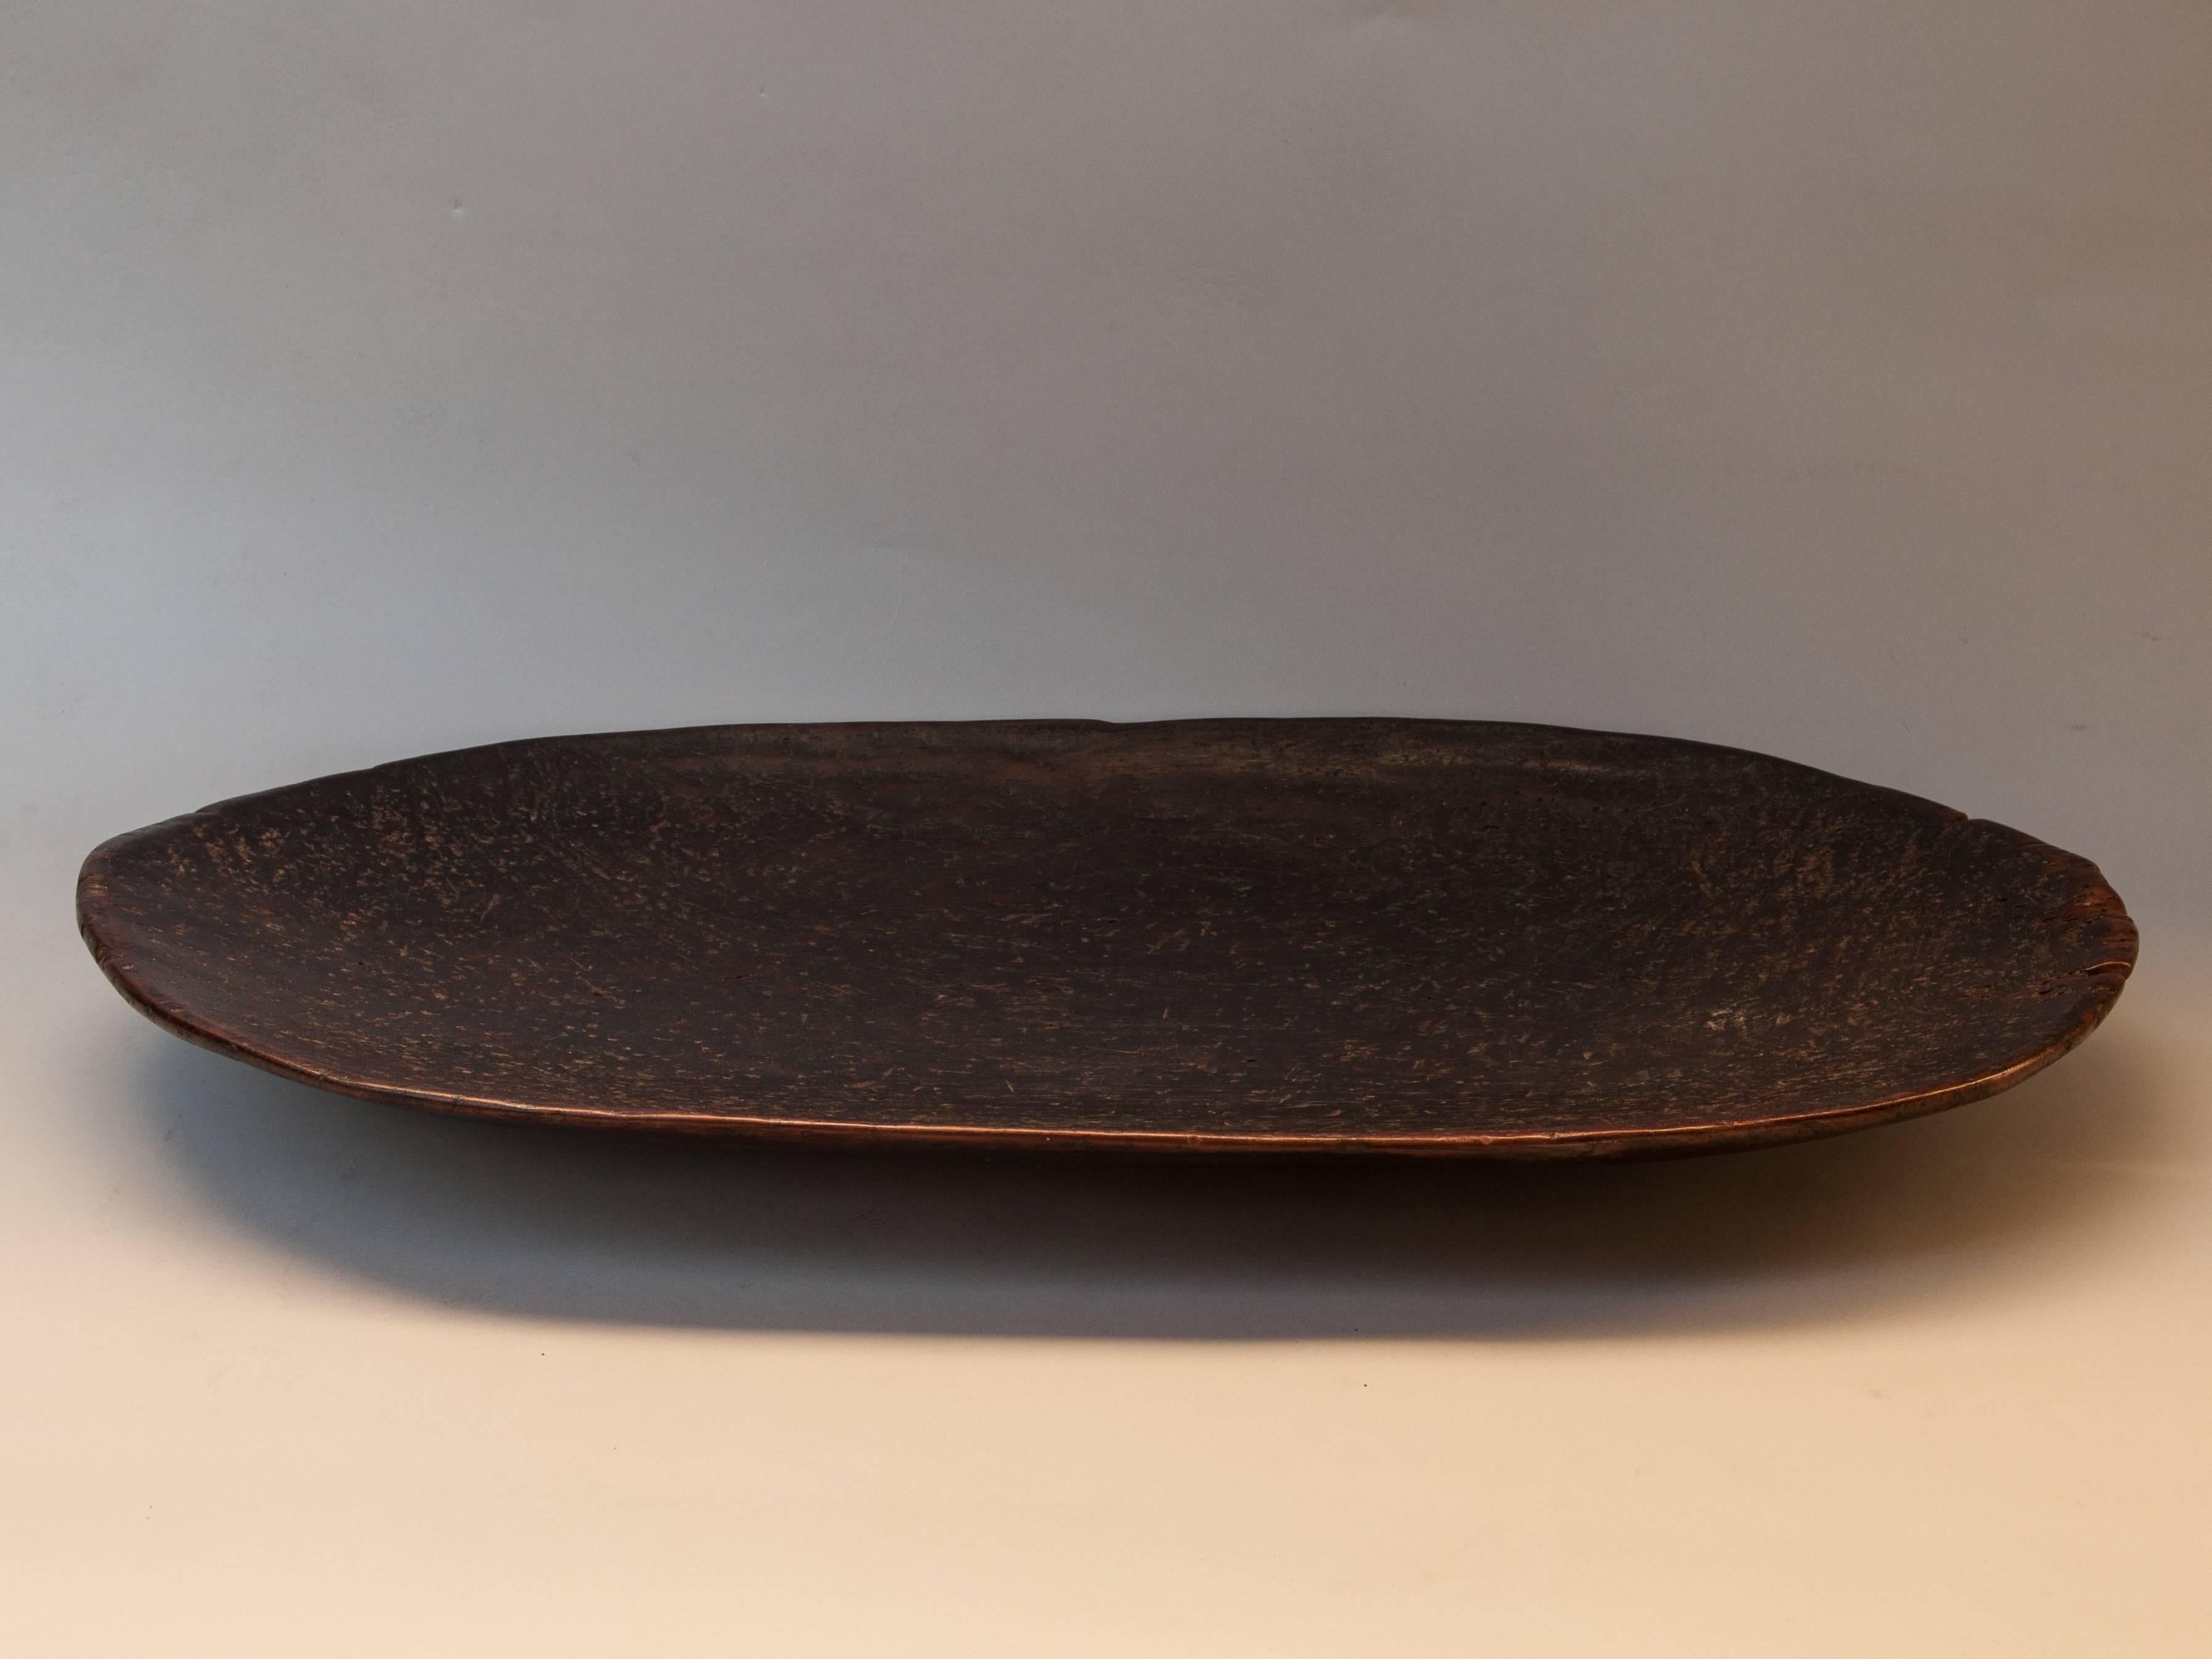 Tribal hand hewn wooden tray Mentawai Island, mid-20th century.
Fashioned by hand from a single piece of local hardwood, this oblong shallow wooden tray was used to present food and fruits when receiving guests. The shape is particular to these